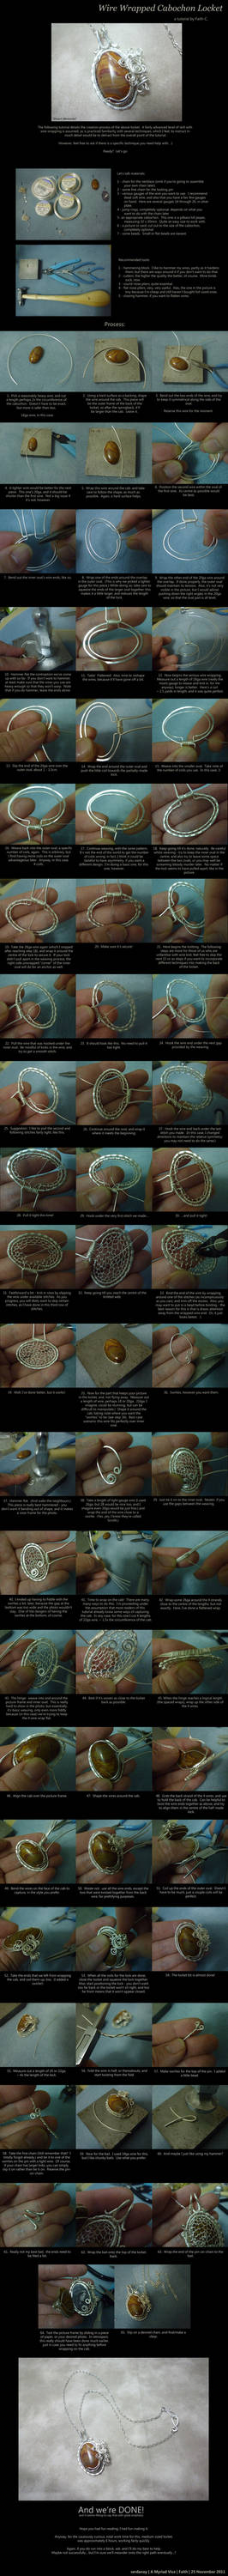 Wire Wrapped Cabochon Locket Tutorial